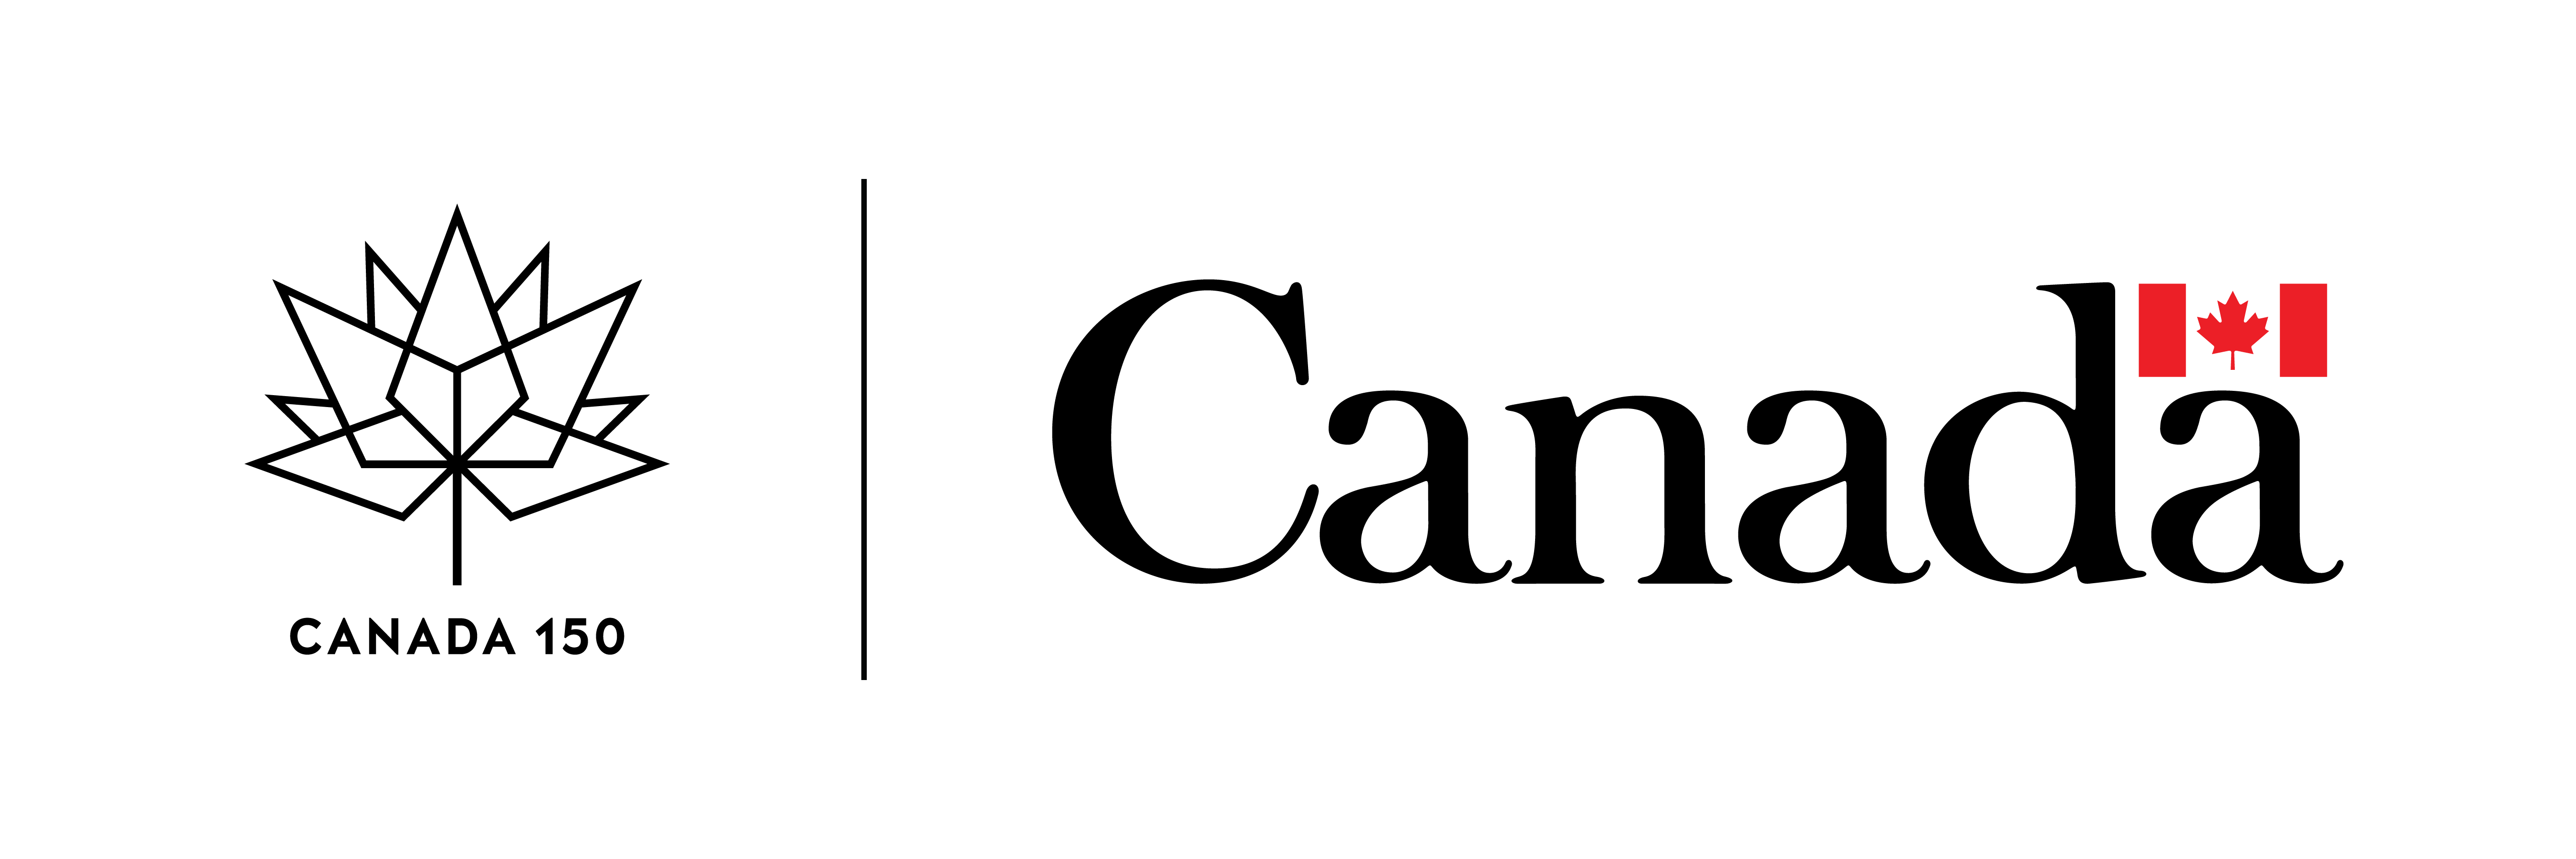 Canada White Logo - Communications Requirements for Projects Fundedada